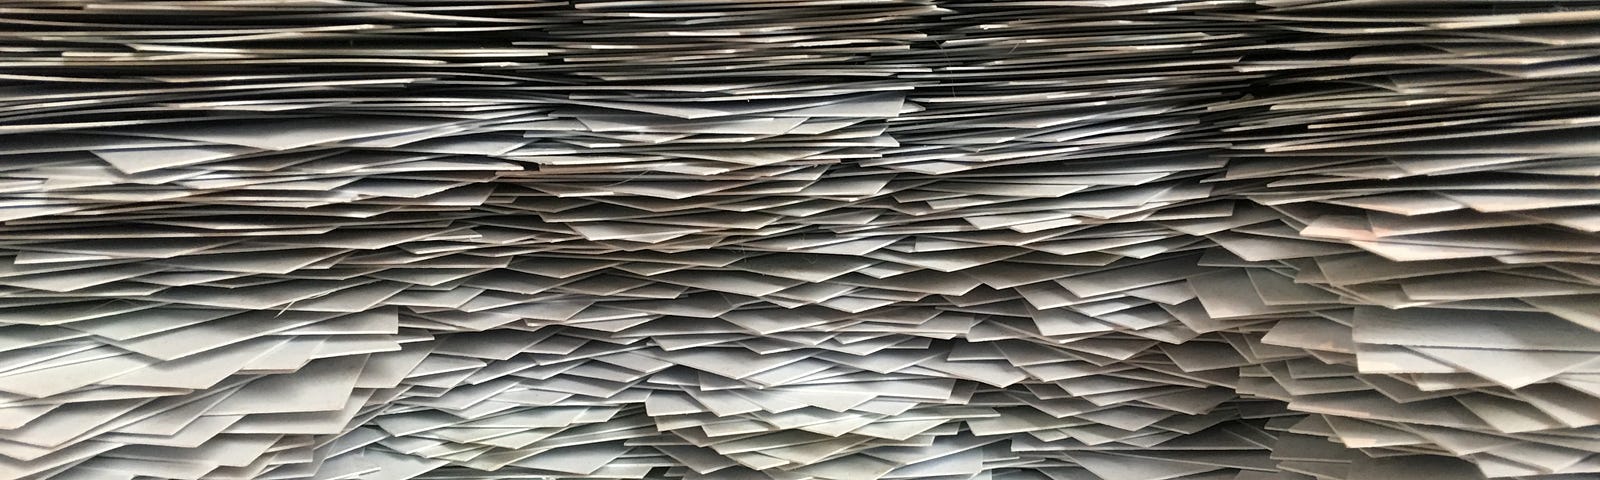 stacks of paper taking up the entire screen.